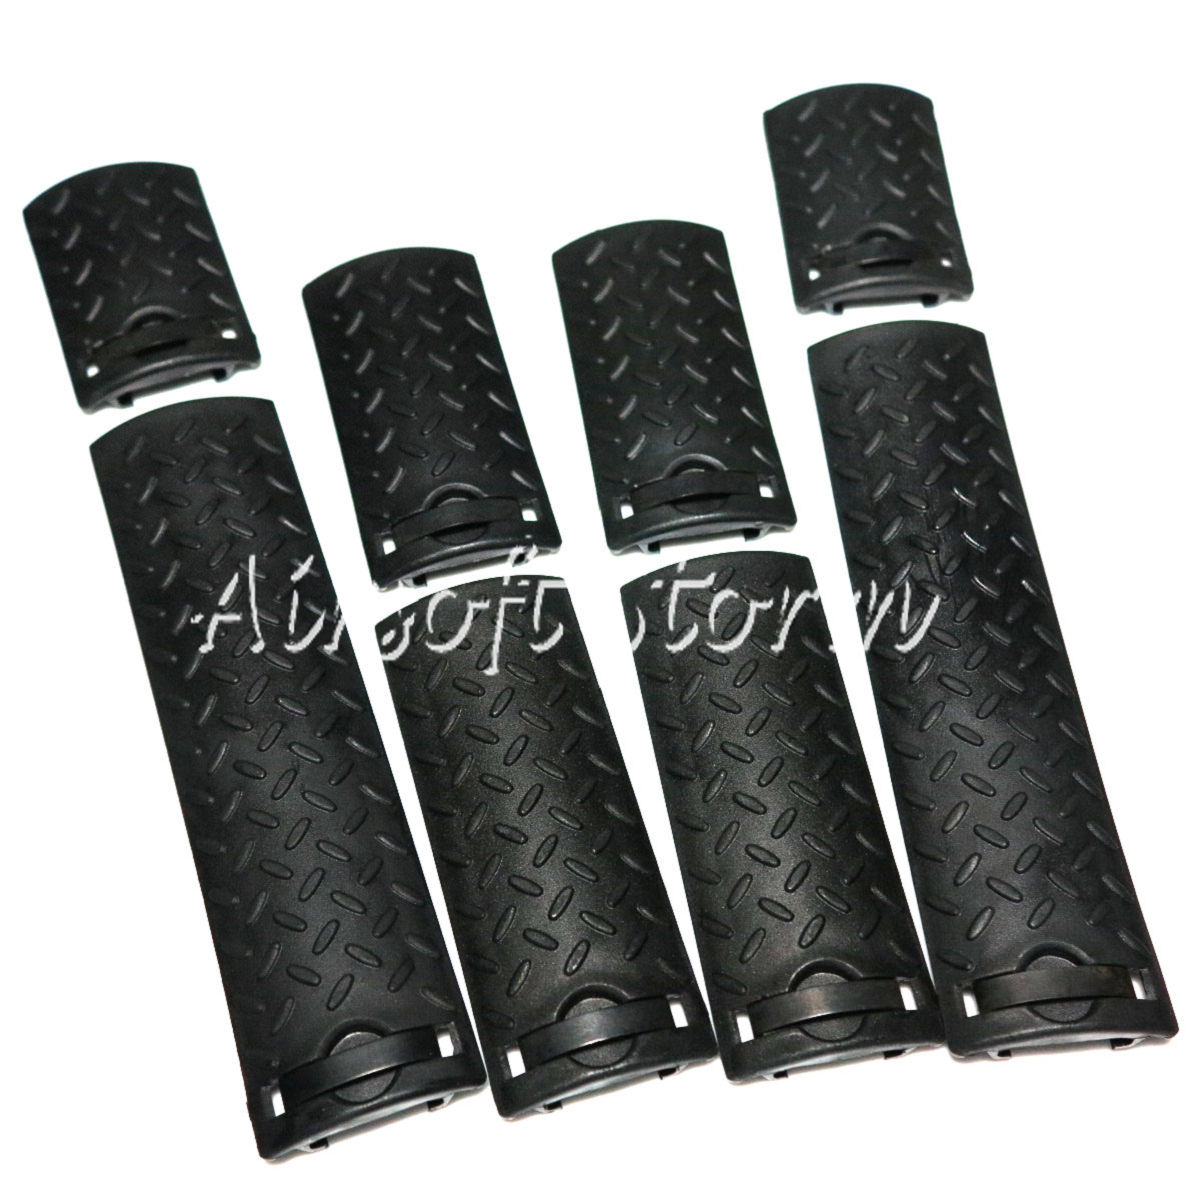 Shooting Tactical Gear 8pcs Set ENERGY Skidproof Texture Type Rail Cover Panel Black